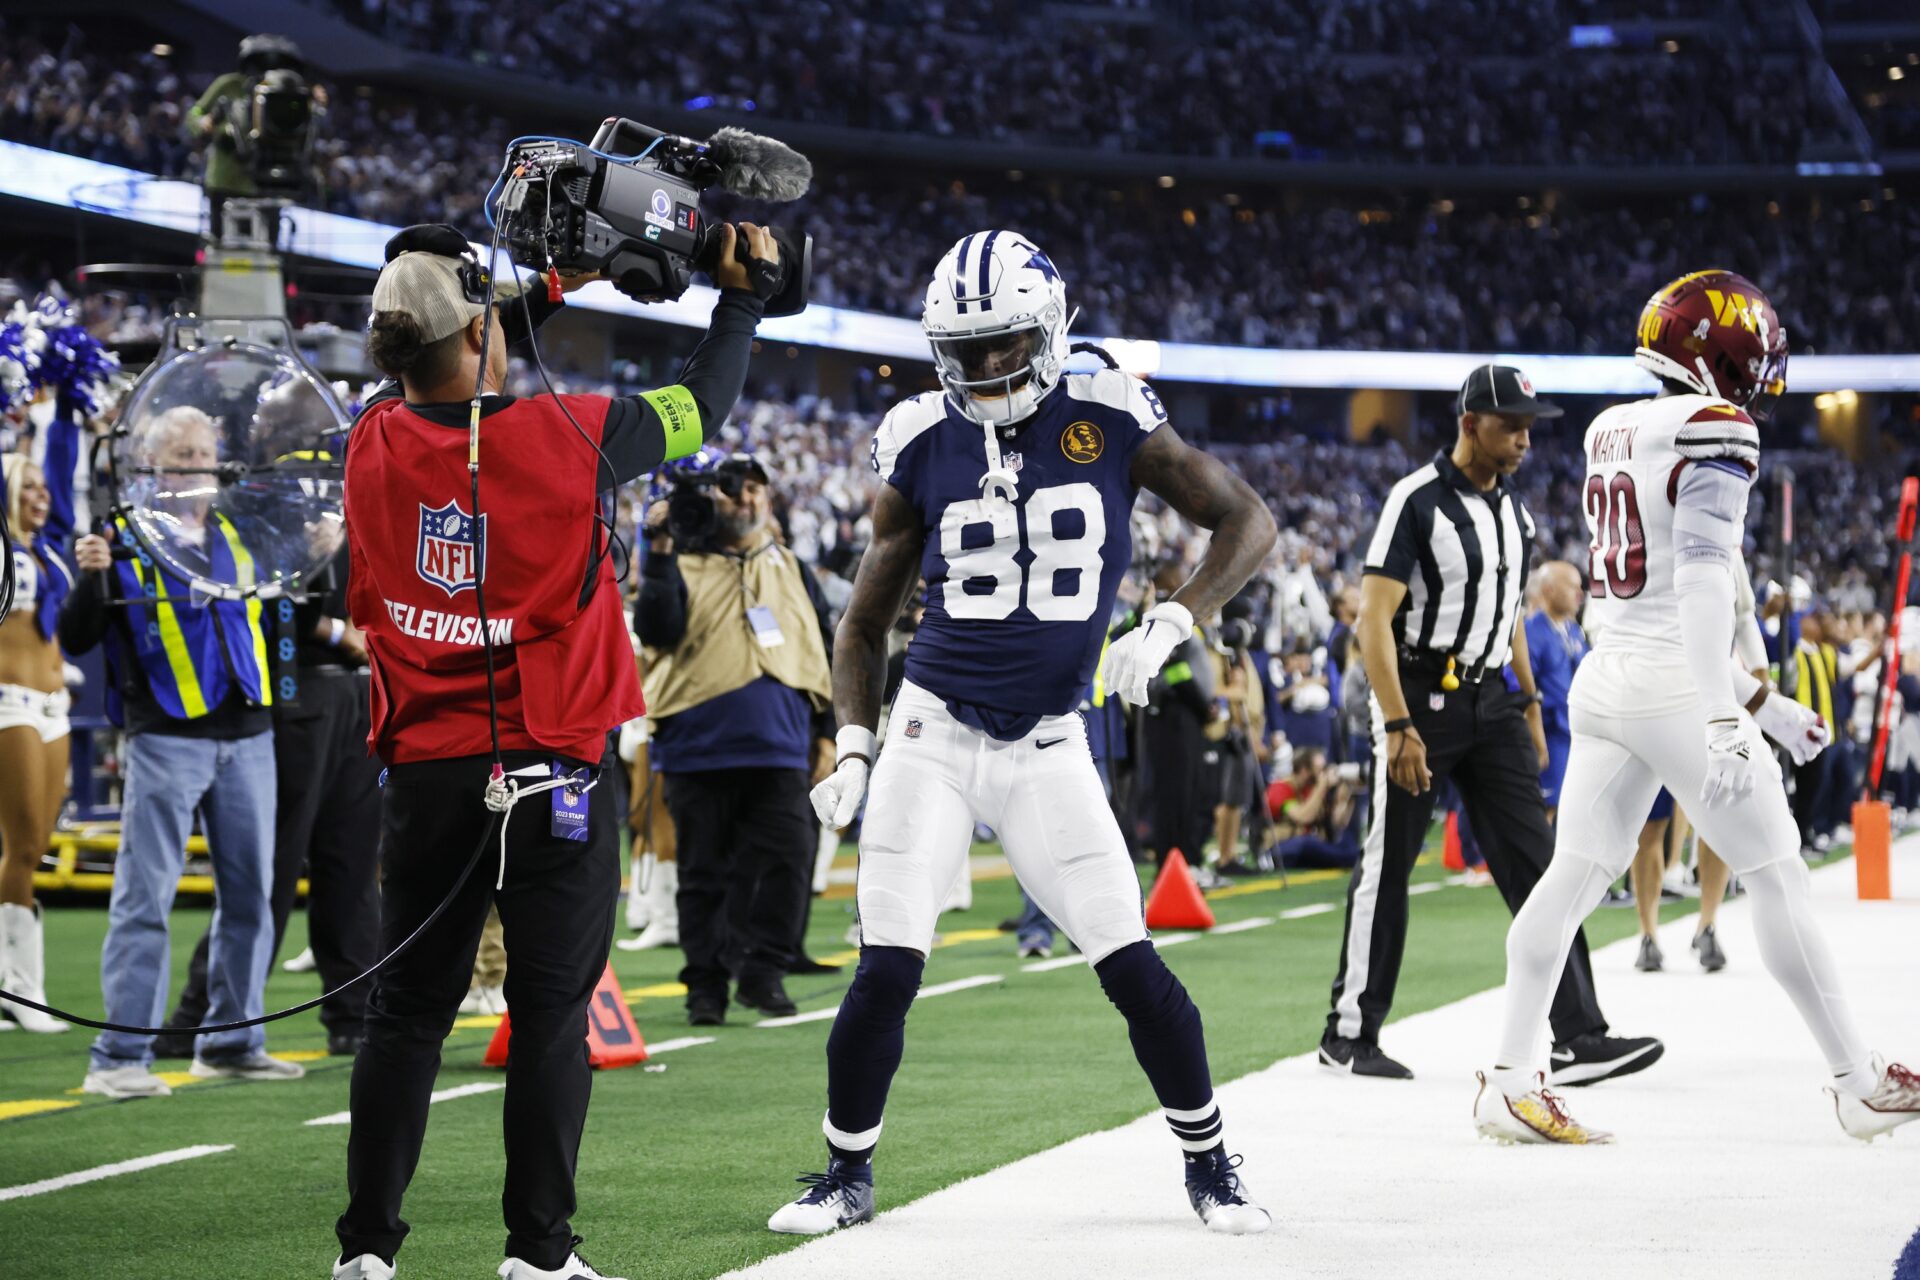 Dallas Cowboys wide receiver CeeDee Lamb (88) celebrates scoring a touchdown in the fourth quarter against the Washington Commanders at AT&T Stadium.